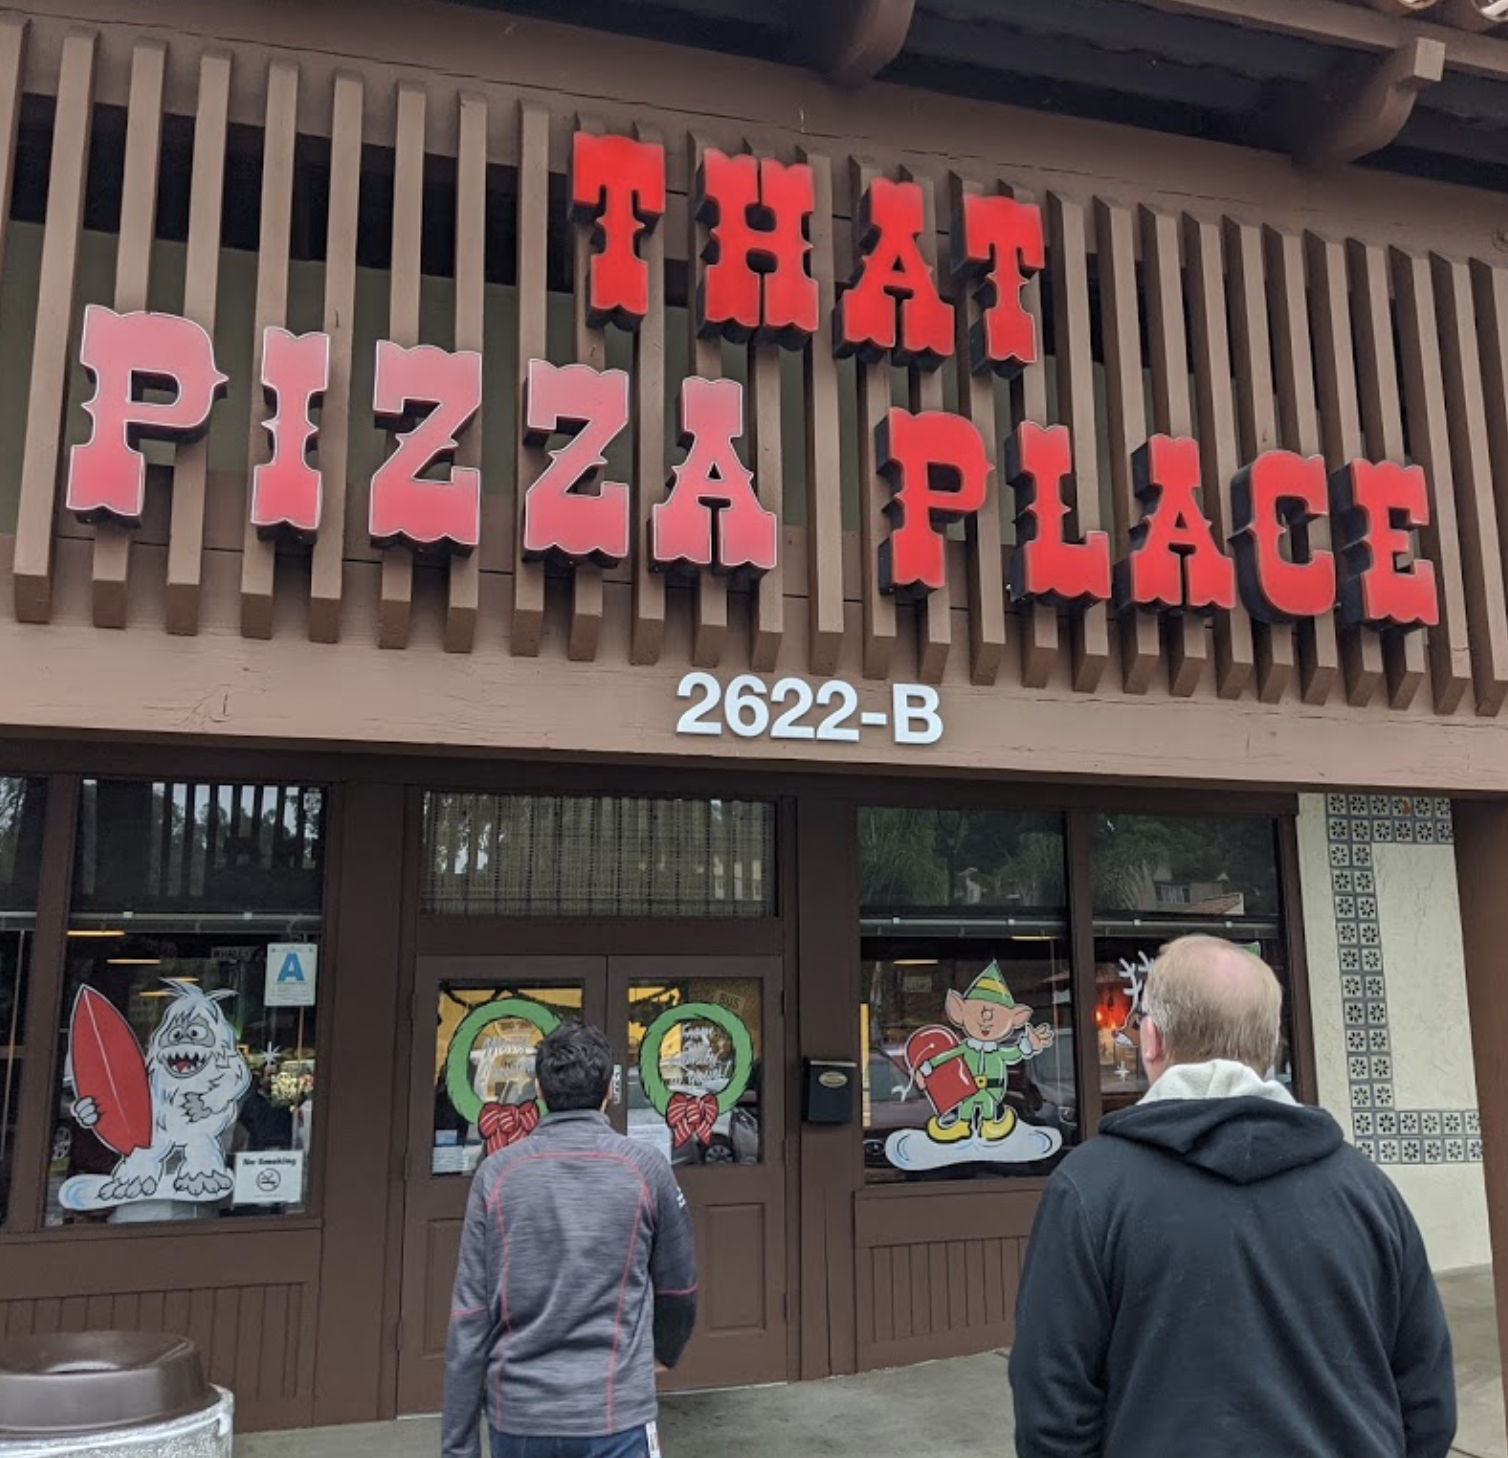 Papa's Pizza Closing After 40 Years in Business